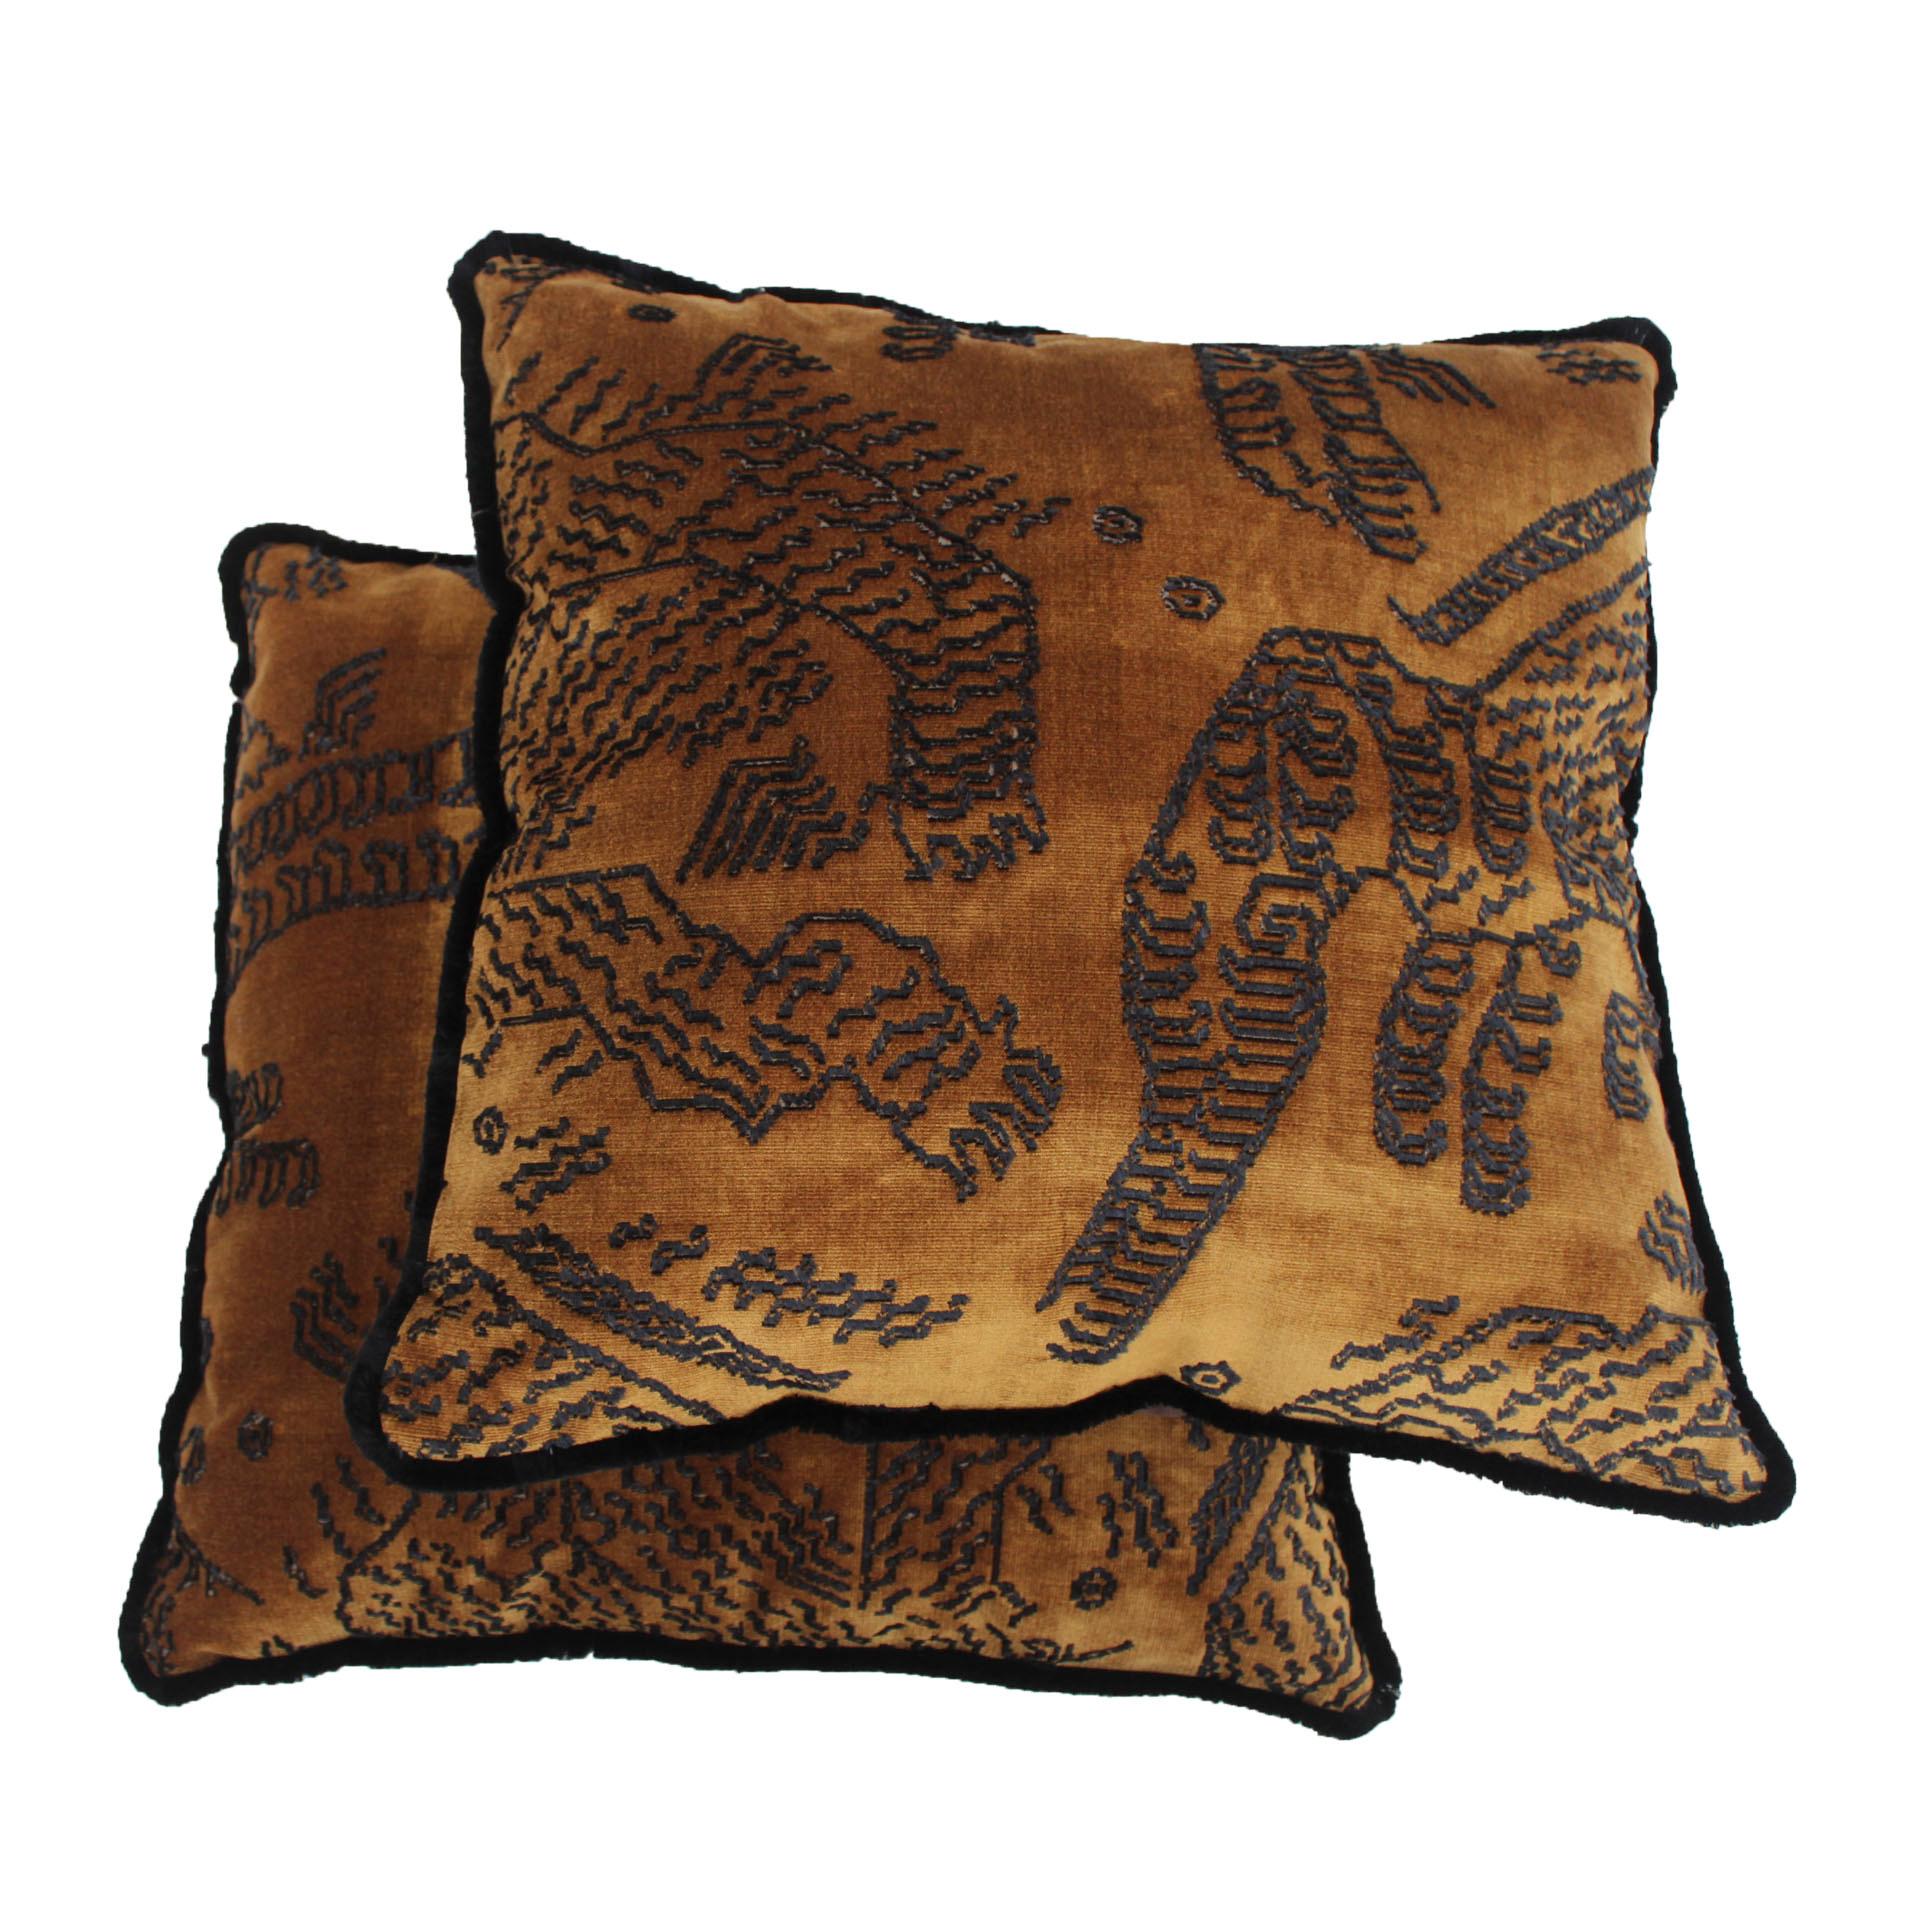 Cushions made of velvet and cotton fabric. Design edited by Dedar, Tiger Mountain. Finished with fringes and zip at the back.

Every item LA Studio offers is checked by our team of 10 craftsmen in our in-house workshop. Special restoration or